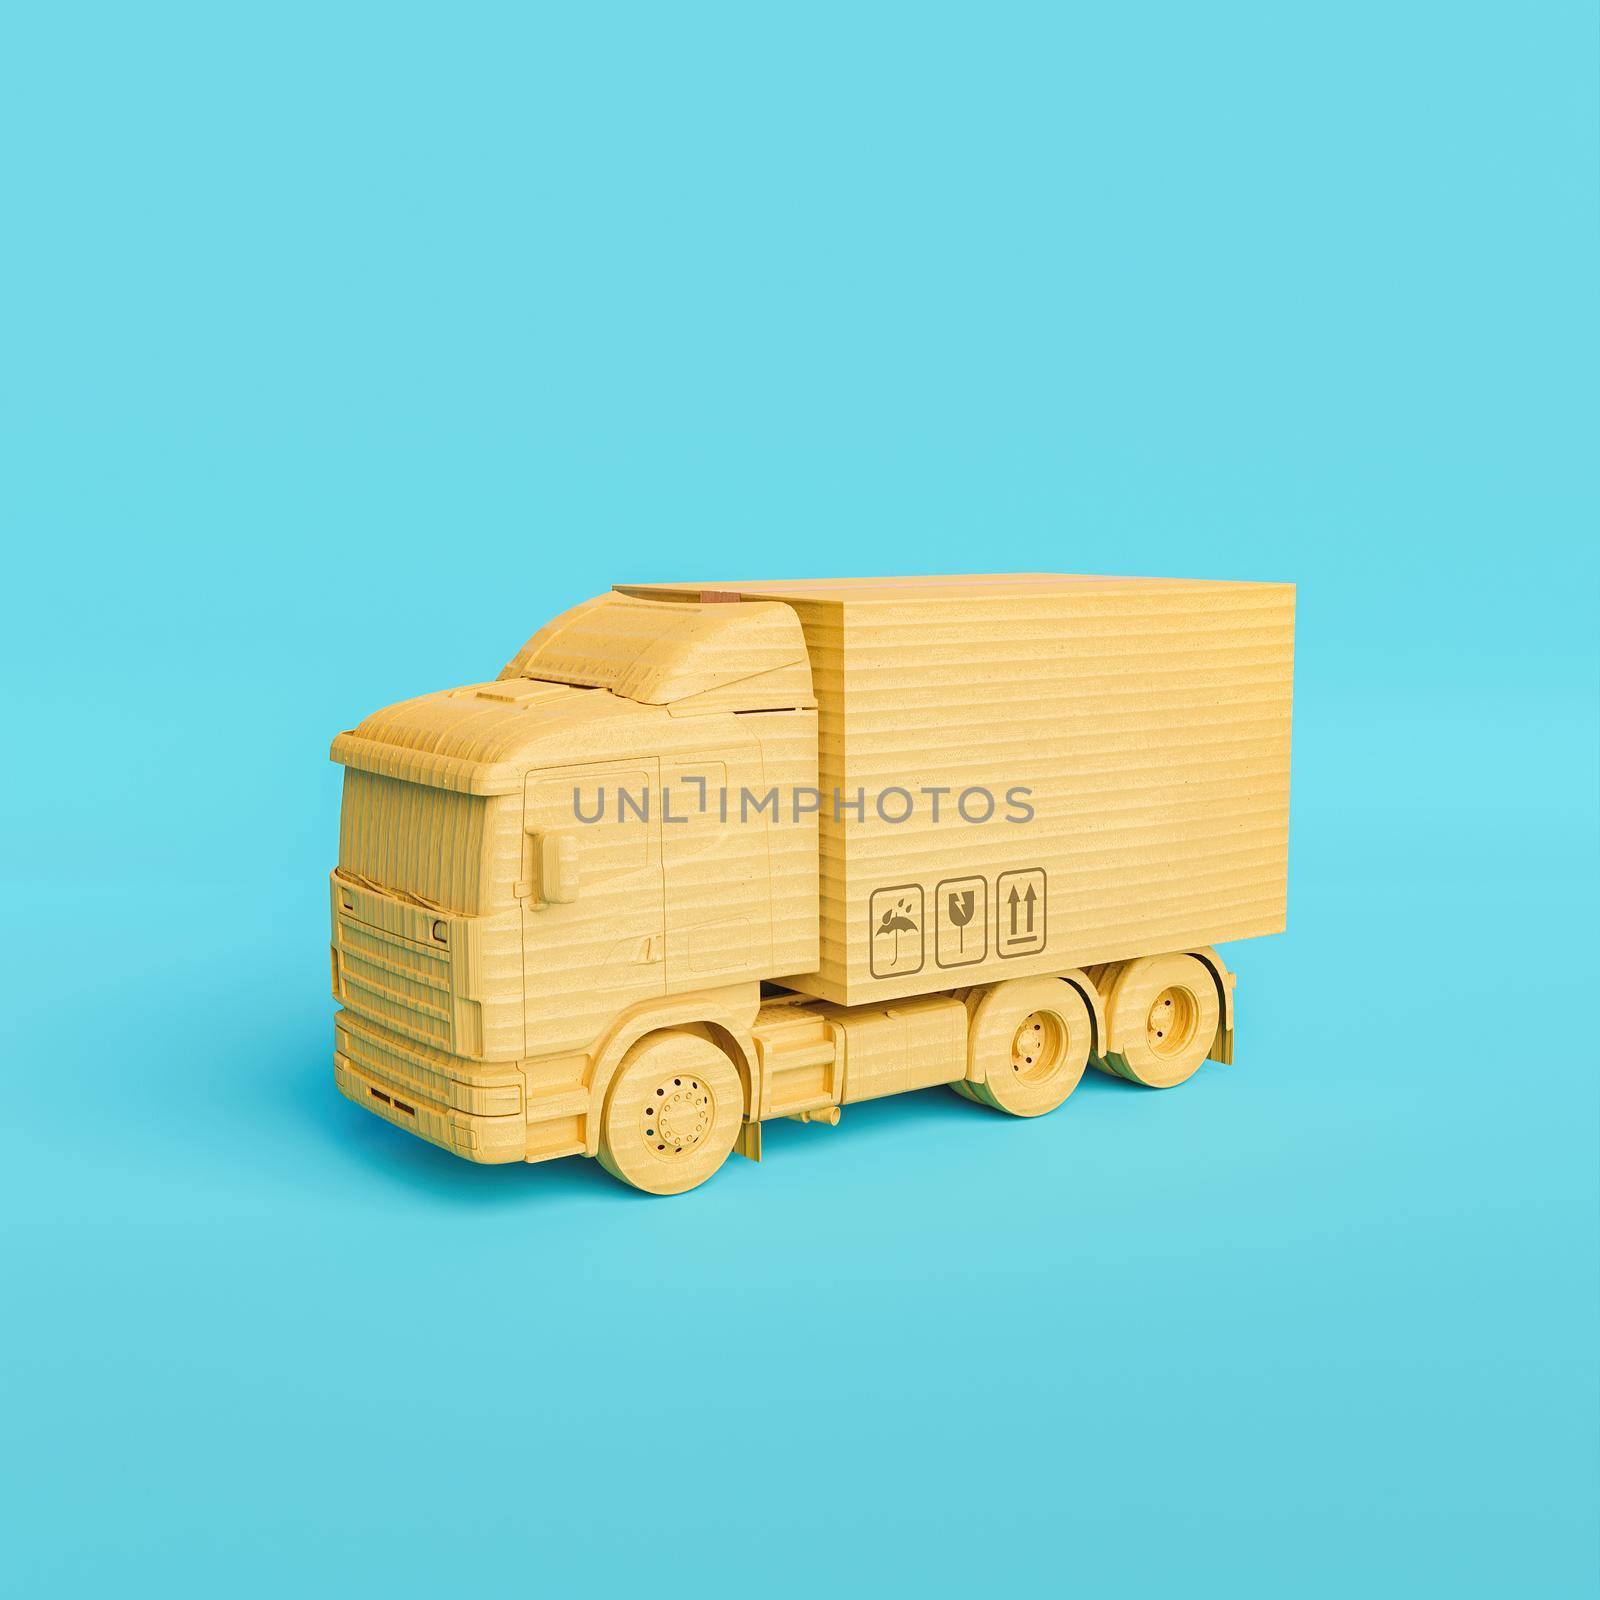 cardboard delivery truck with package on top. minimalistic scene. e-commerce concept by asolano